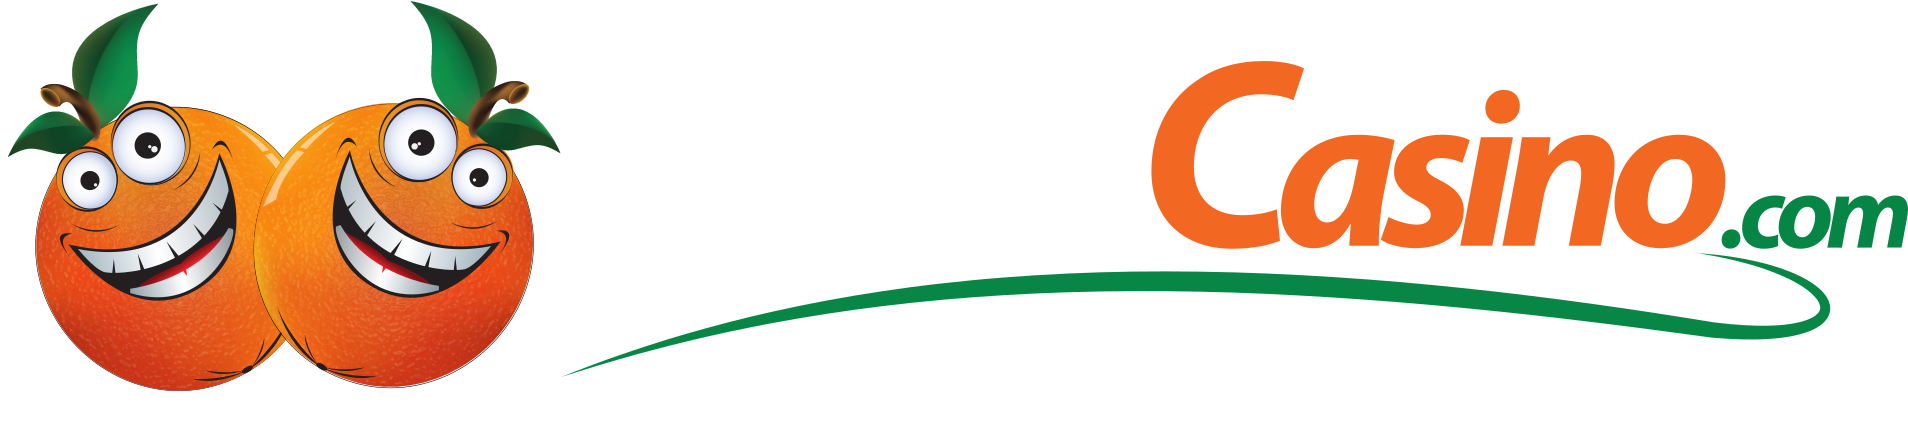 Casino as One of the Top Internet Casino That Accepts Bitcoin